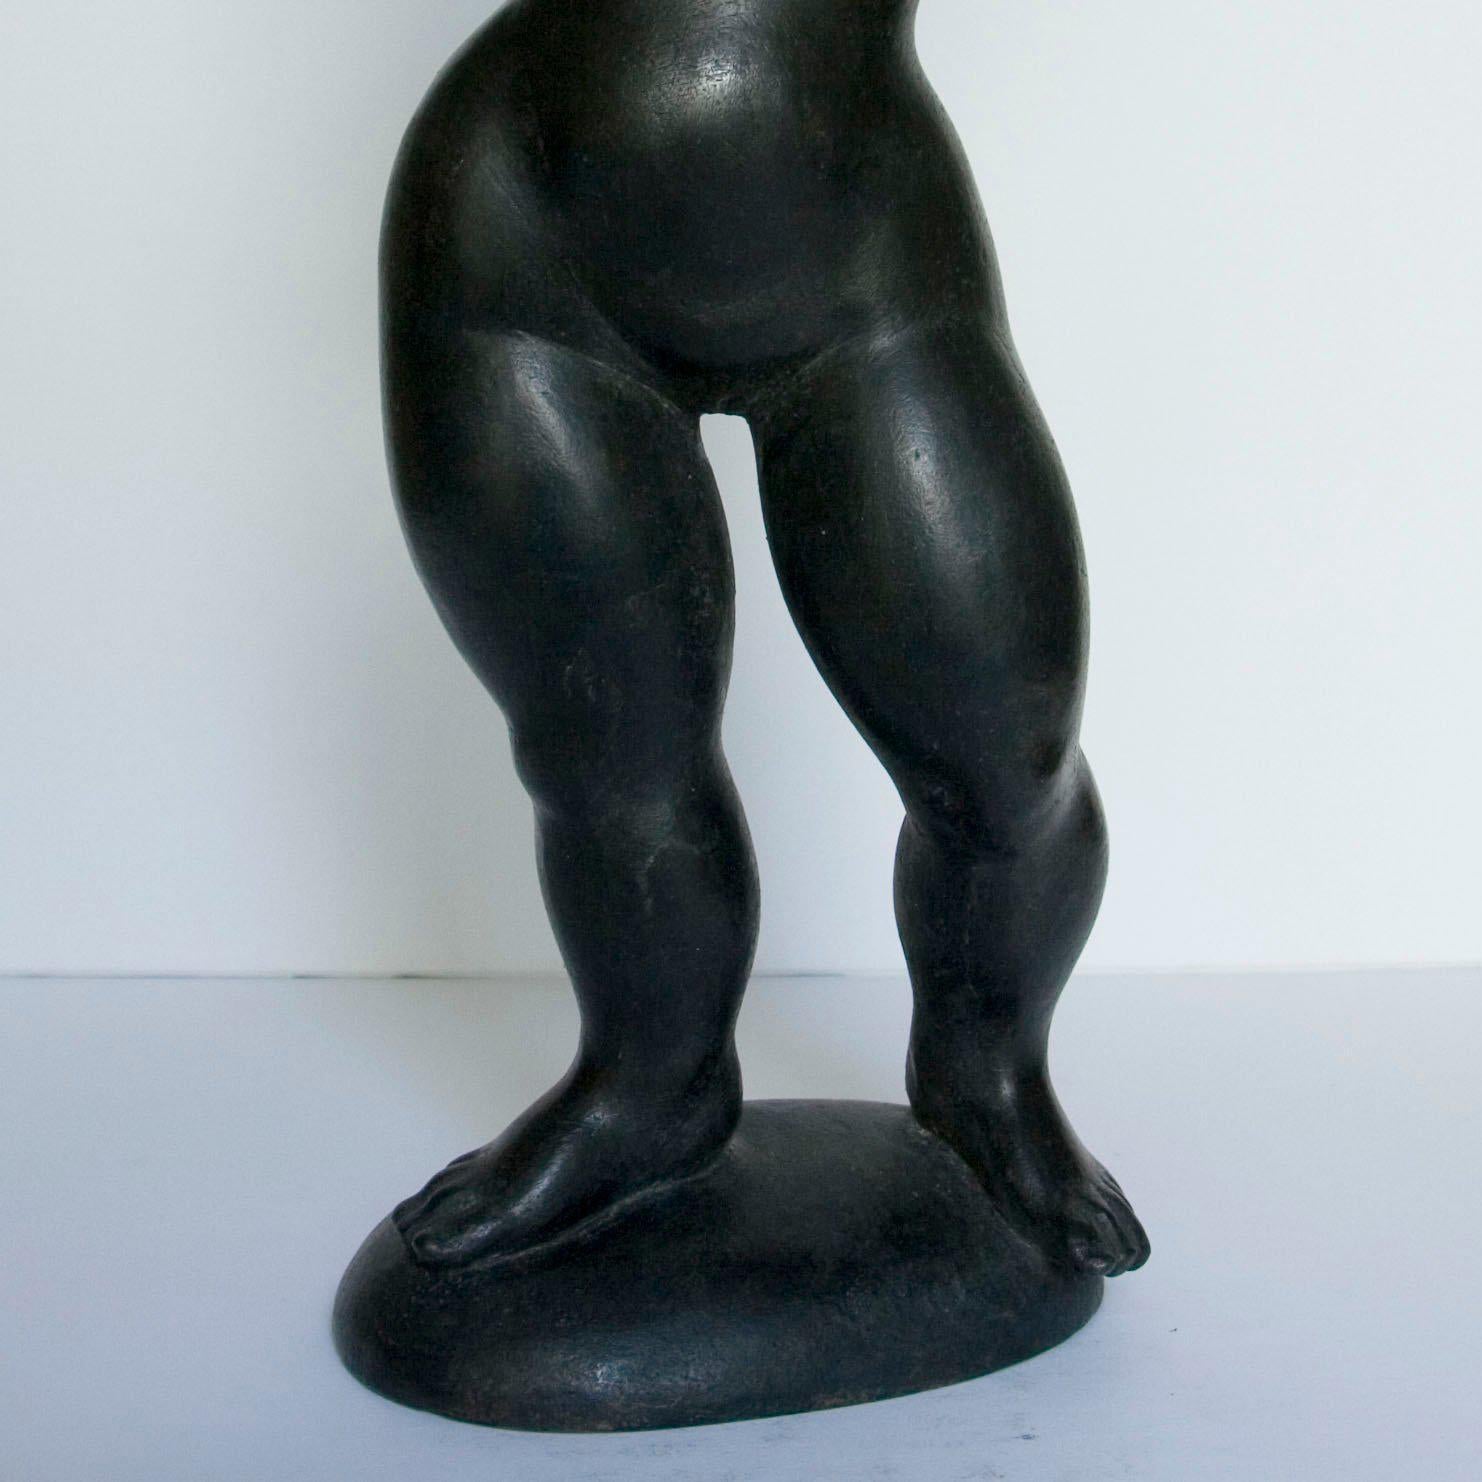 Kleine Pomina (Small Pomina) - Bronze, Female Nude, Contemporary, Austrian,  - Sculpture by Giovanni Rindler